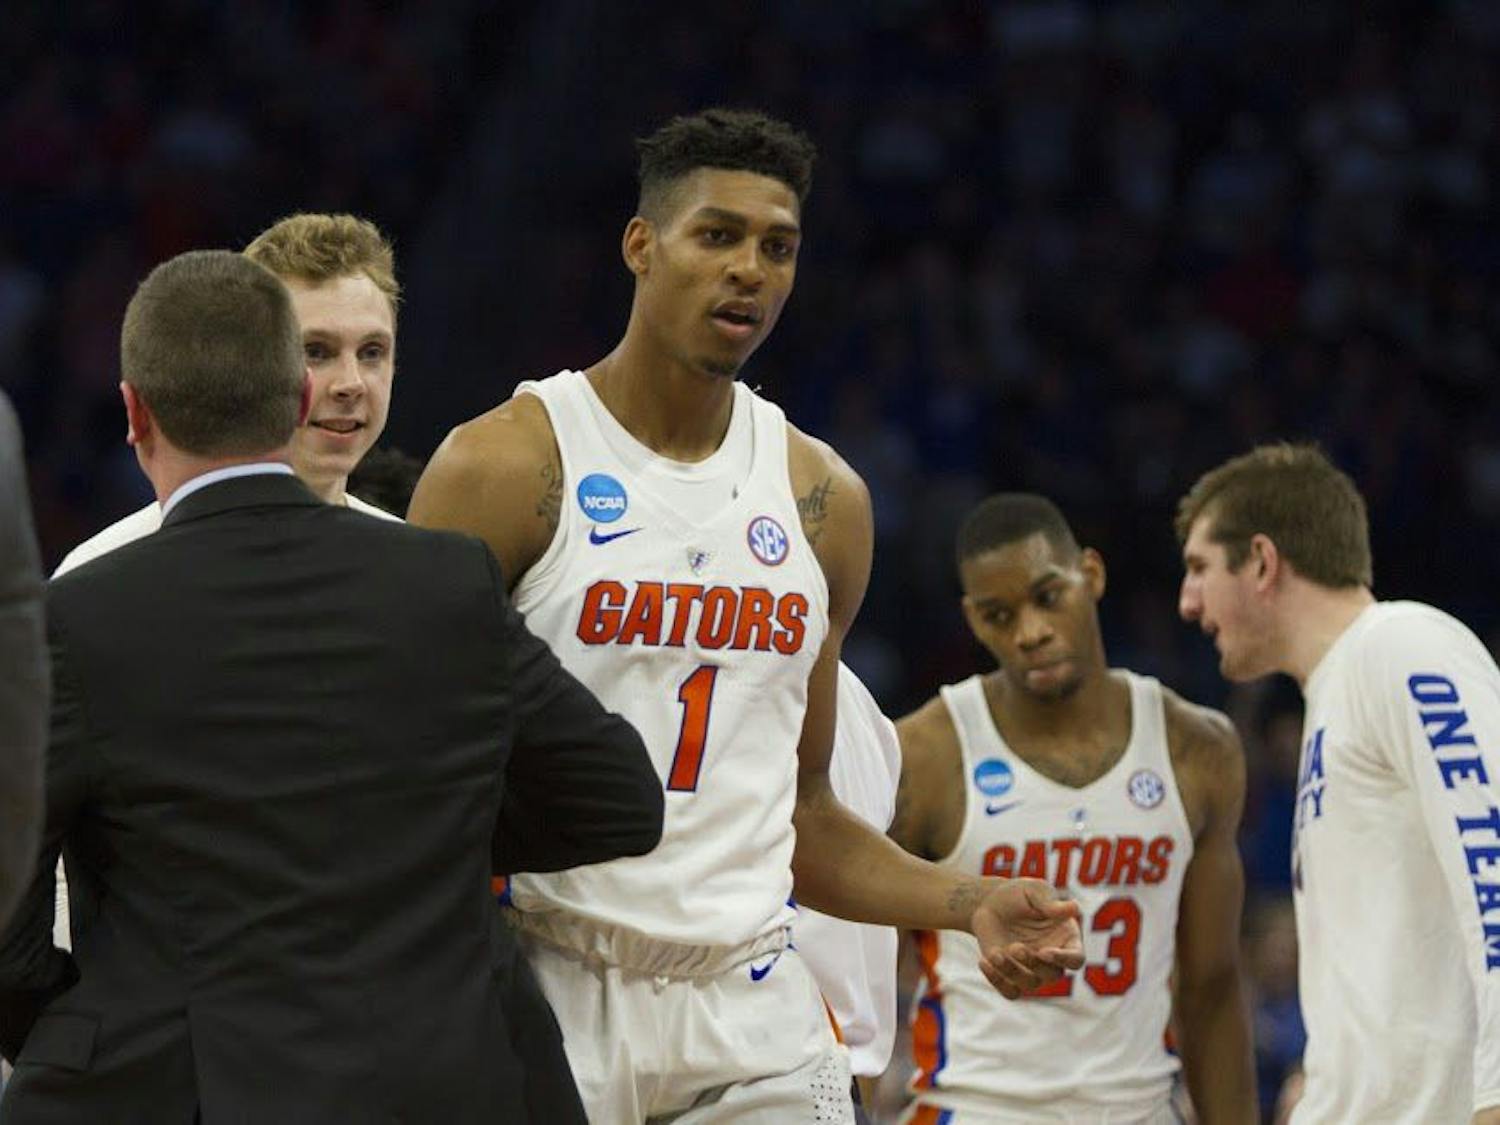 UF forward Devin Robinson walks off the court during Florida's 65-39 win against Virginia in the NCAA Tournament on Saturday in Orlando.